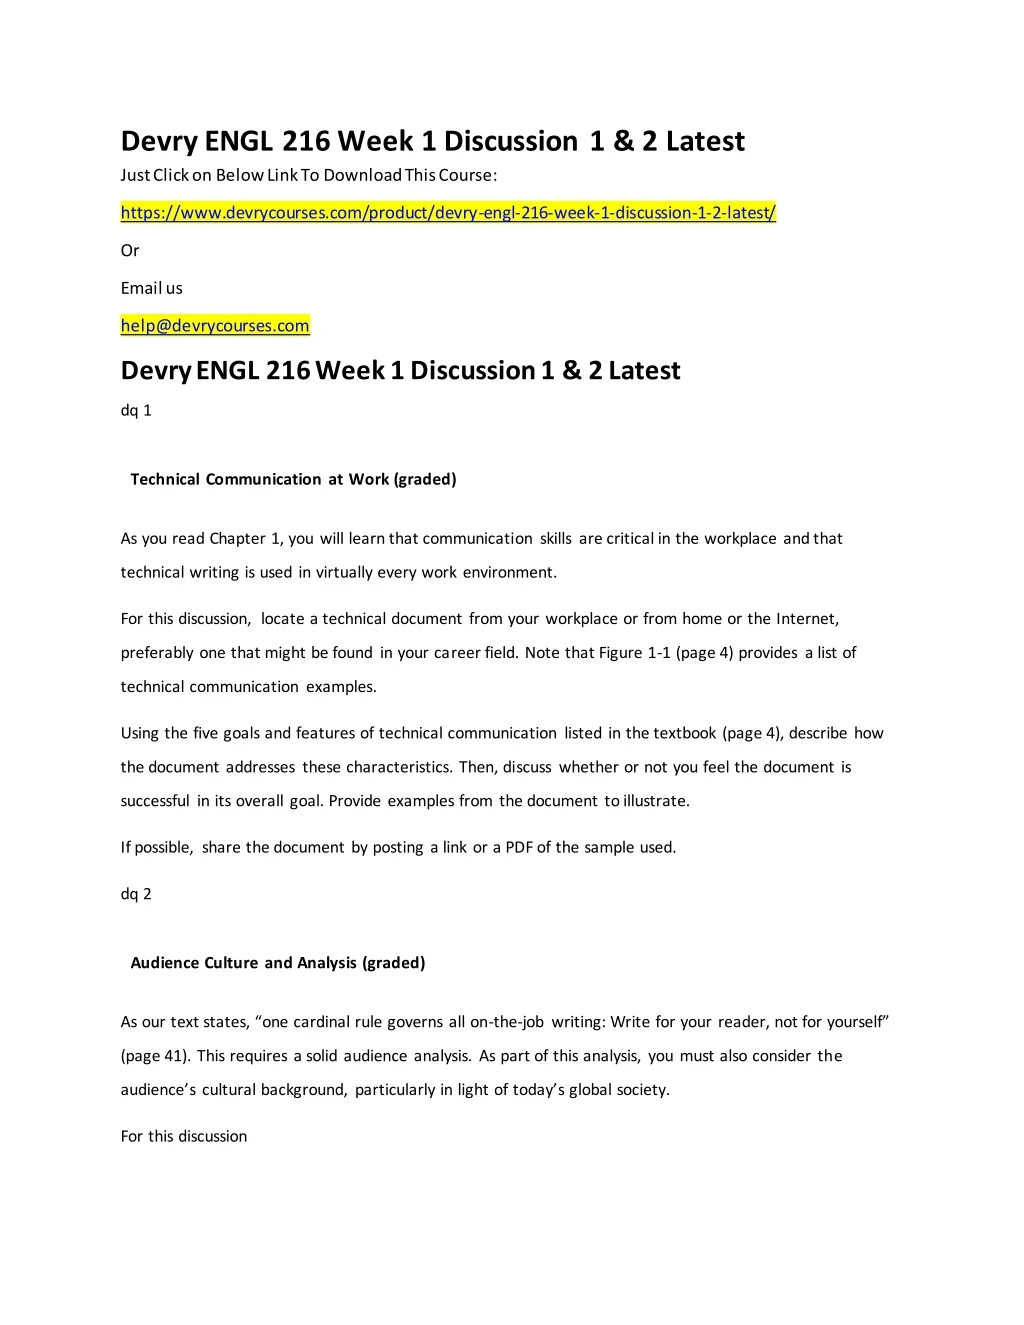 devry engl 216 week 1 discussion 1 2 latest just